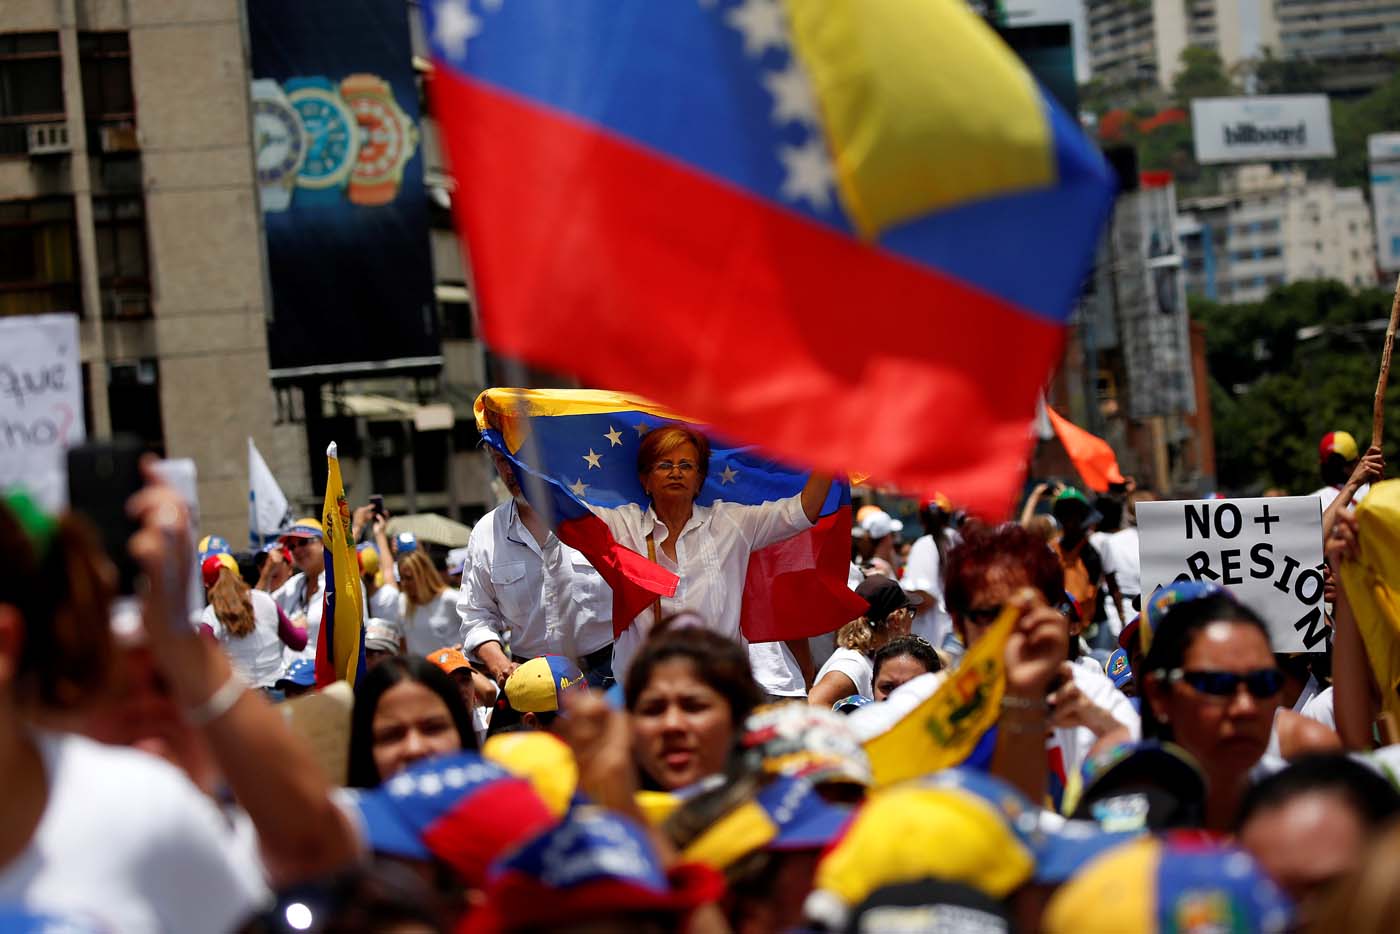 Demonstrators hold Venezuelan flags as they attend a women's march to protest against President Nicolas Maduro's government in Caracas, Venezuela, May 6, 2017. REUTERS/Carlos Garcia Rawlins